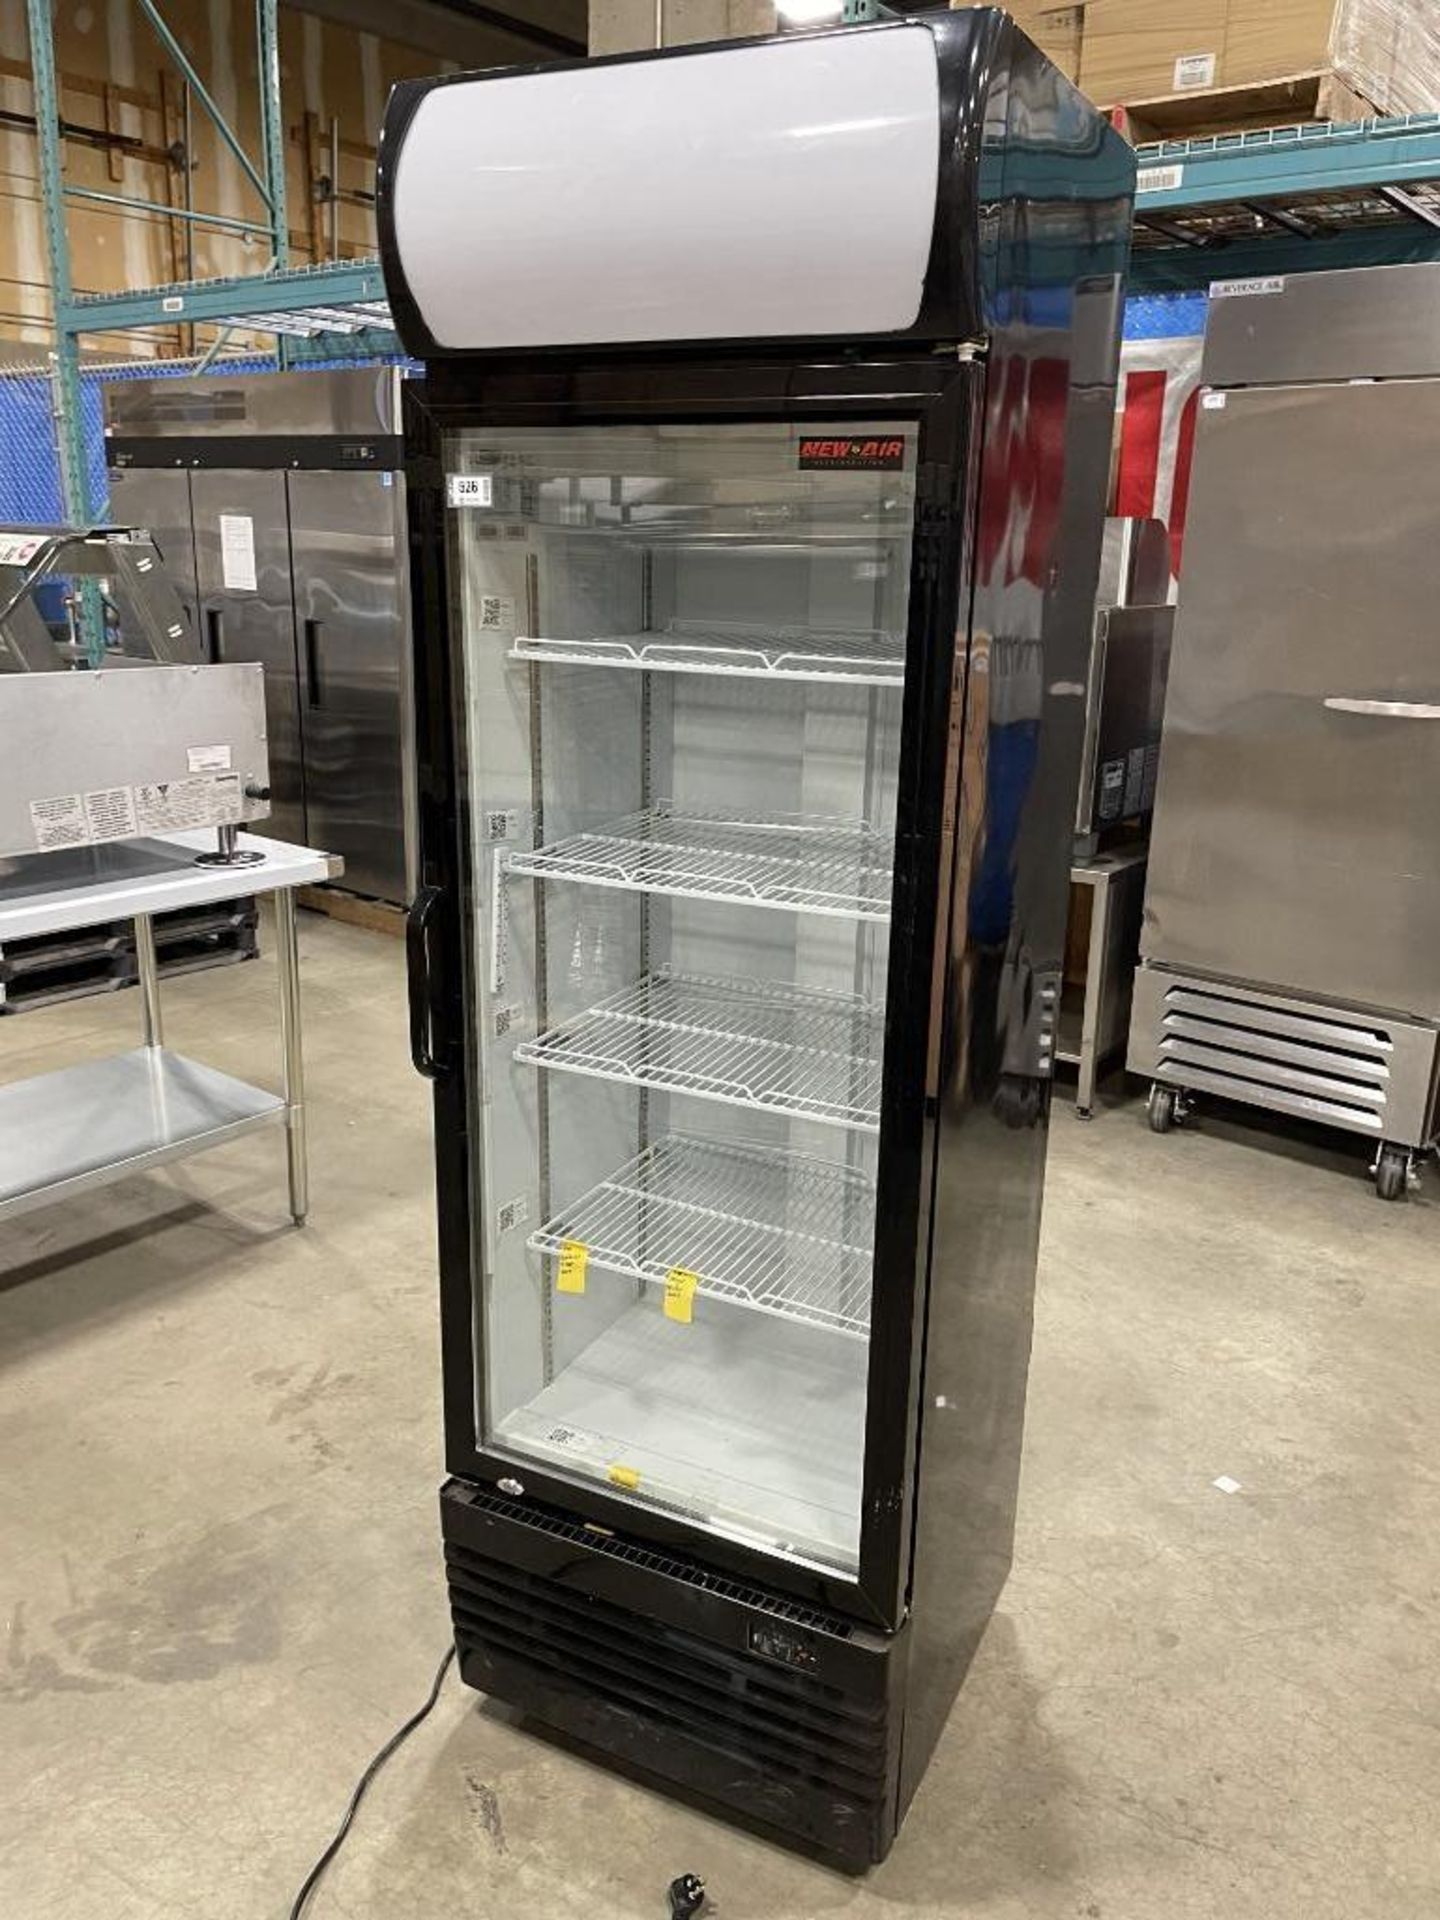 NEW-AIR NGR-036-H SINGLE GLASS DOOR DISPLAY COOLER - Image 10 of 12